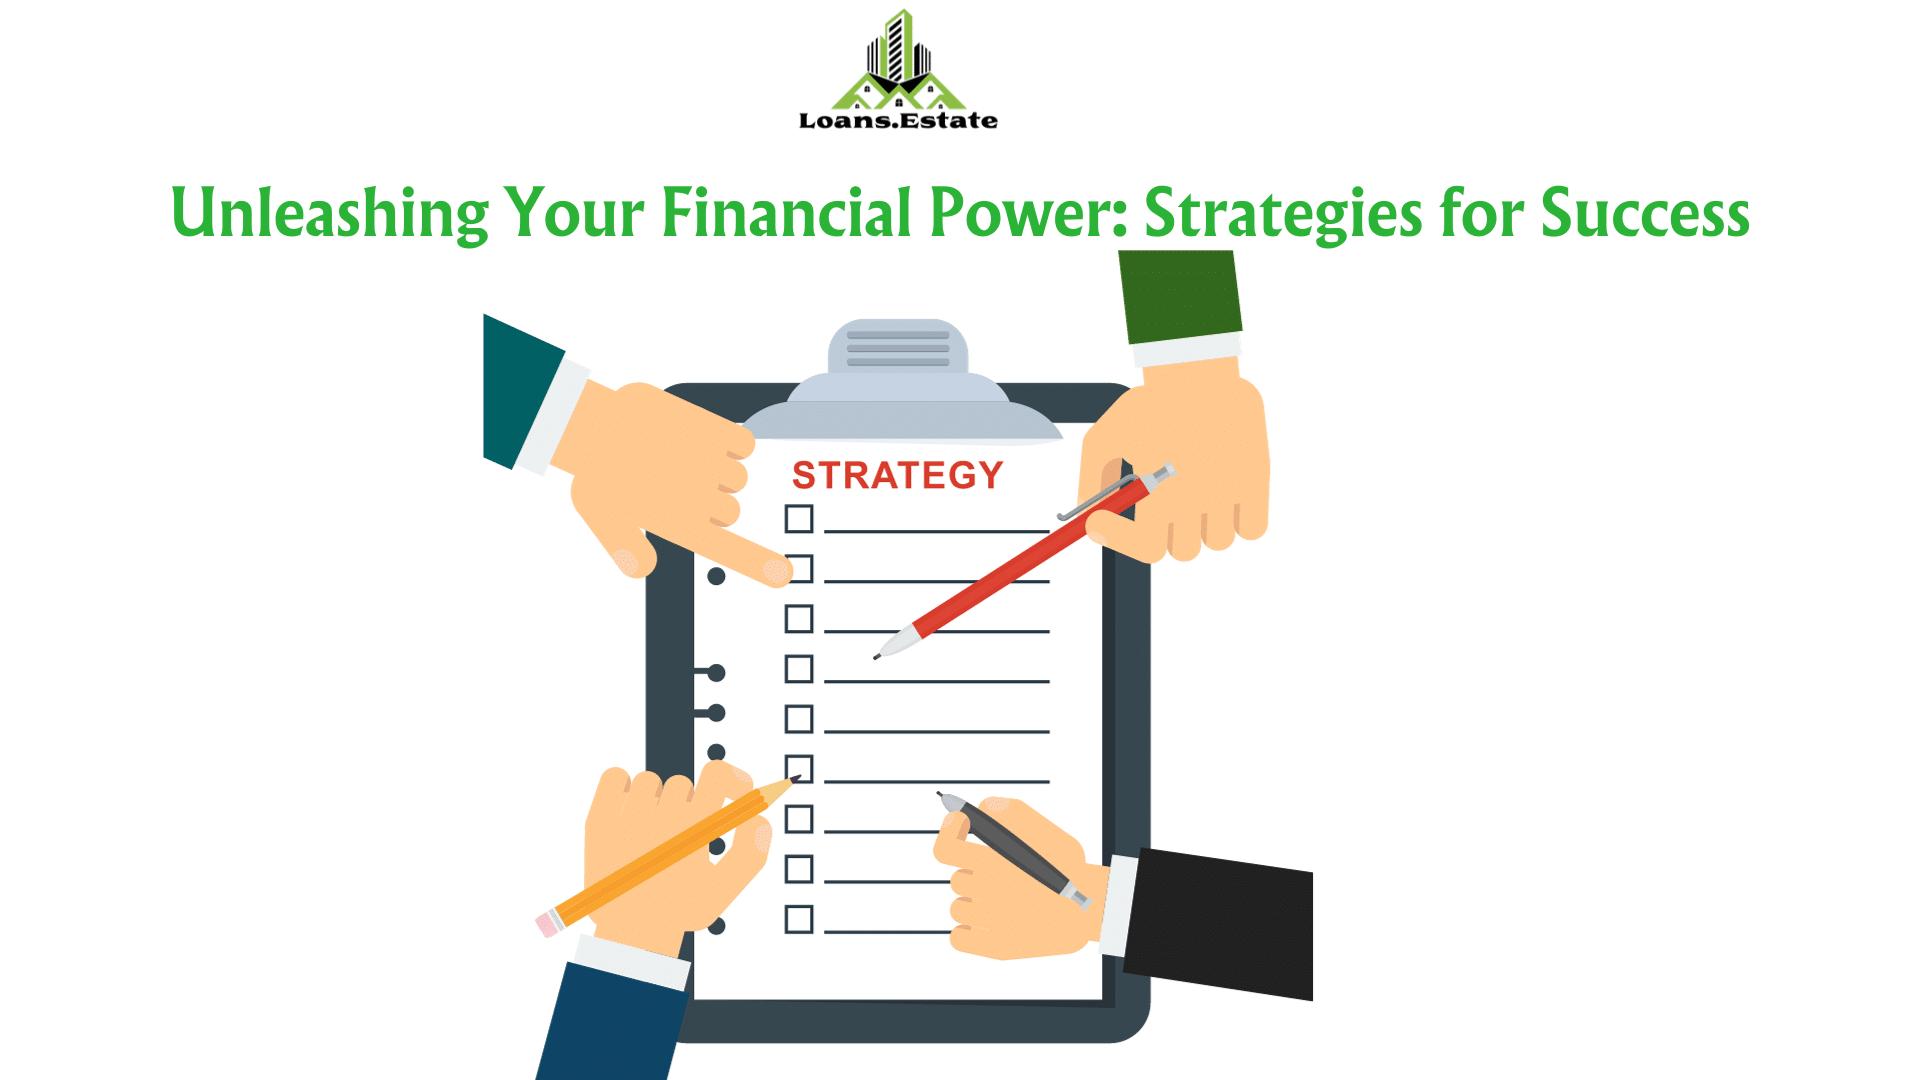 Unleashing Your Financial Power: Strategies for Success